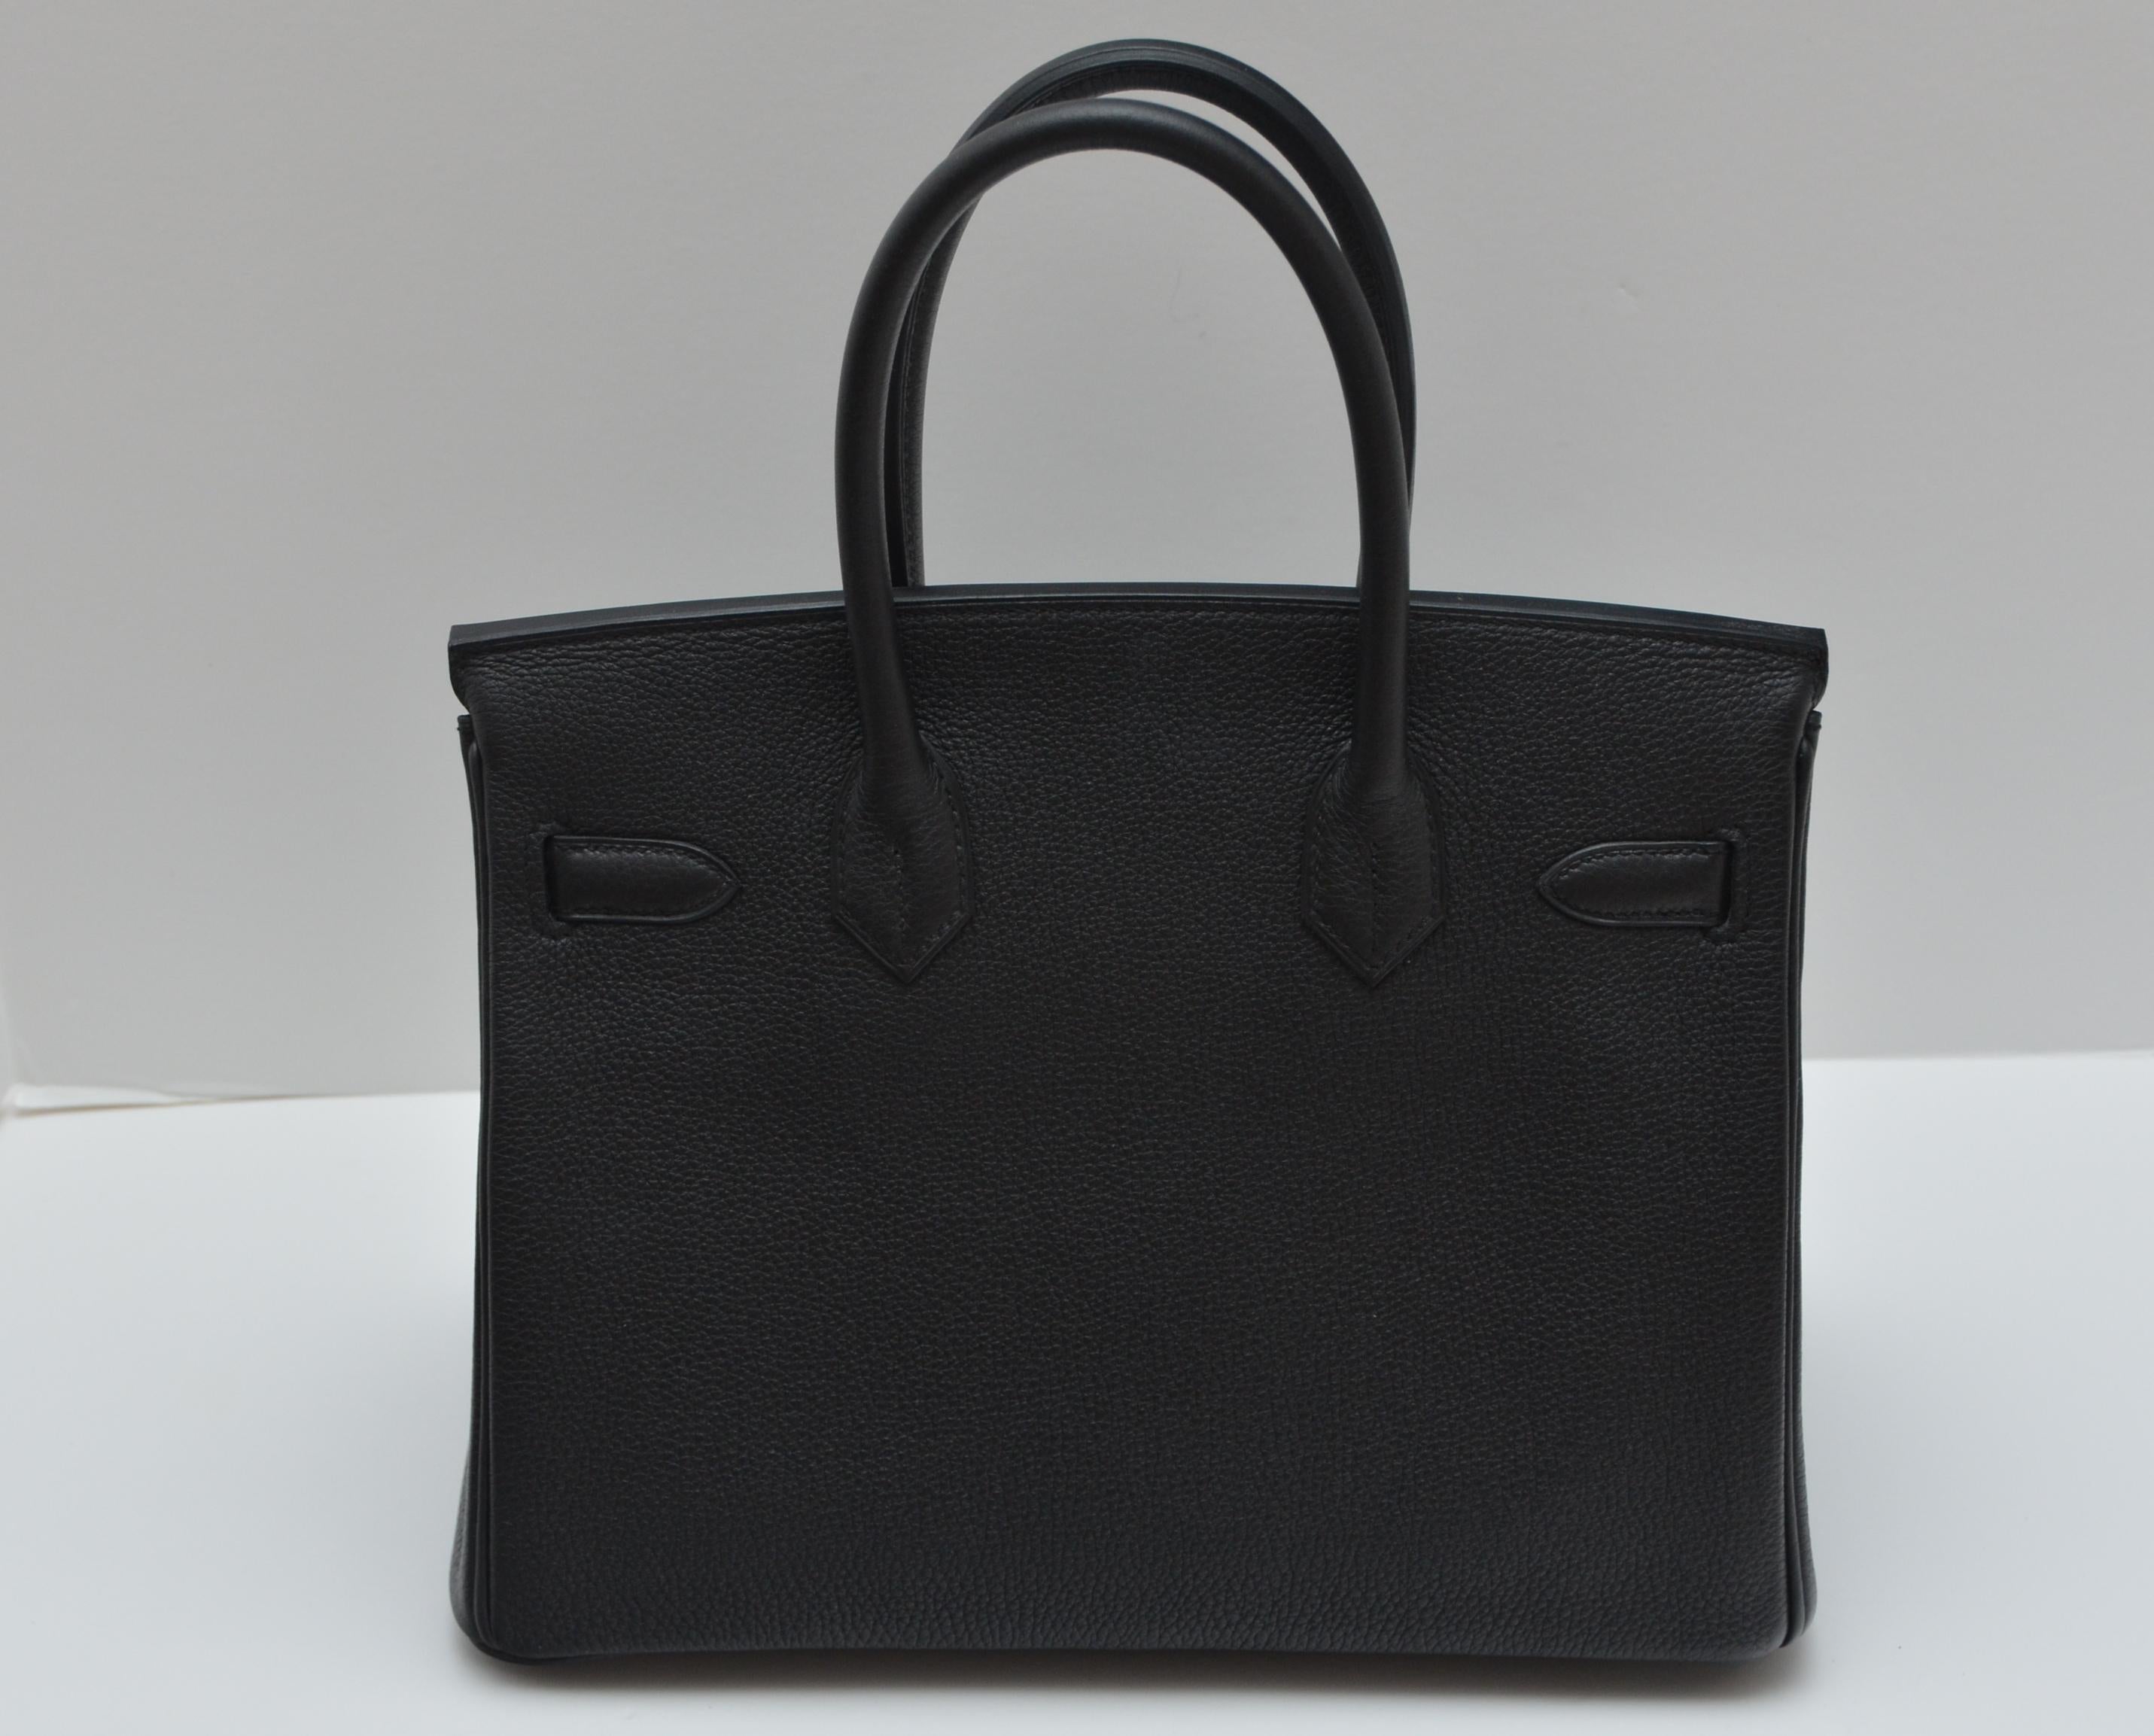 Hermes Black Togo 30cm Birkin Palladium Hardware Leather Bag 
Comes with  keys, lock, clochette, a sleeper for the bag, rain protector, and signature orange Hermes box. 
Please note:felt that usually comes with Birkin is not